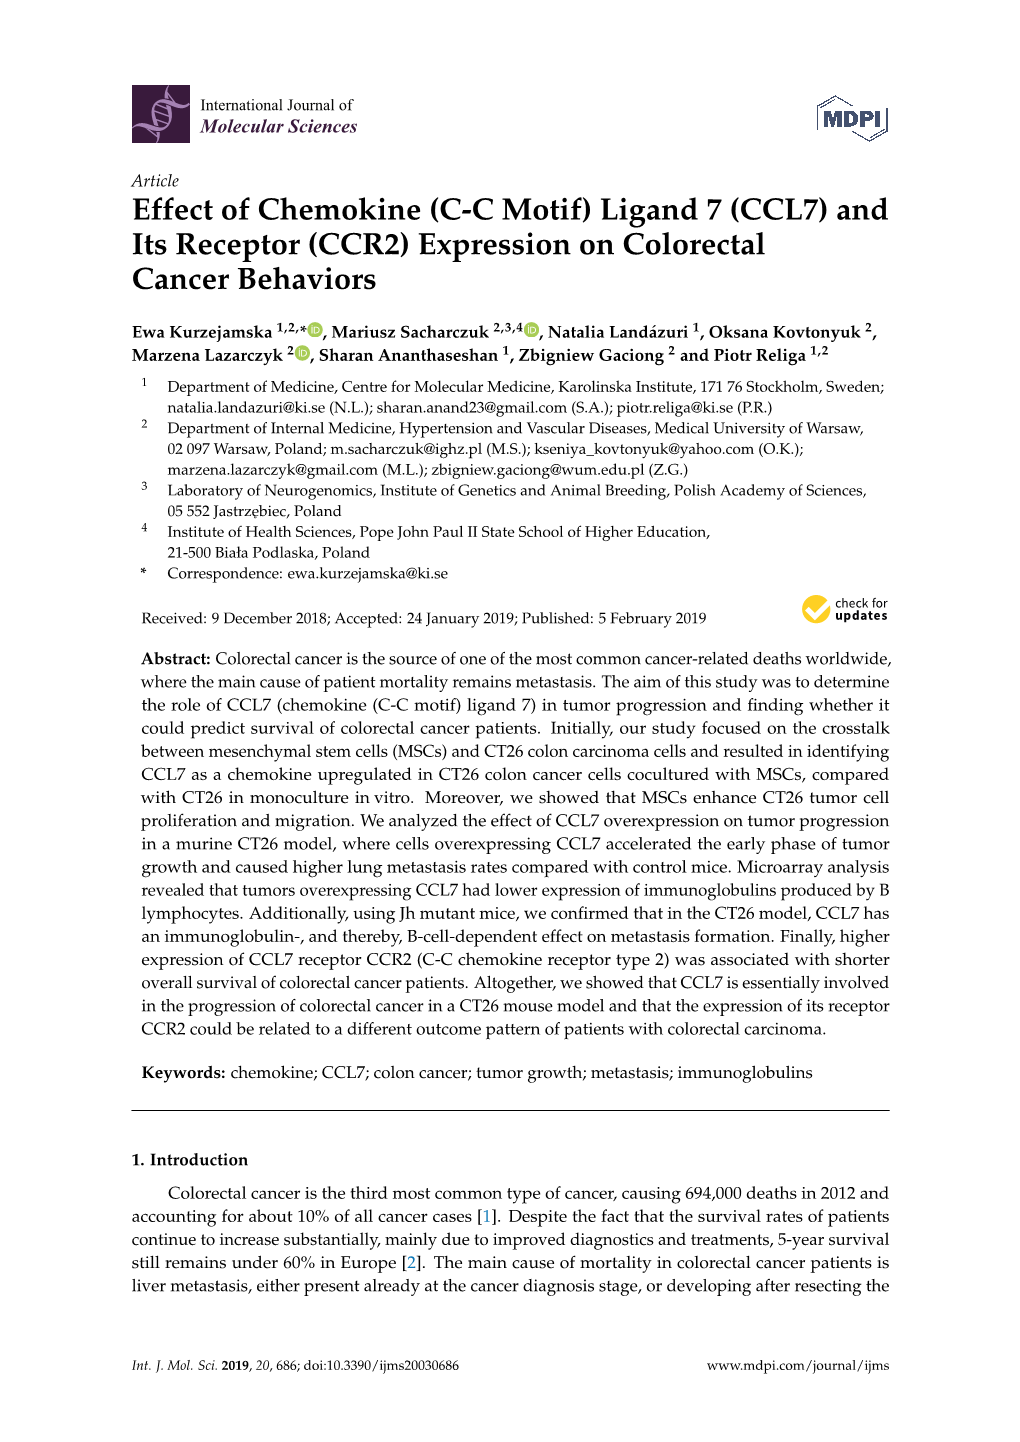 Effect of Chemokine (CC Motif) Ligand 7 (CCL7) and Its Receptor